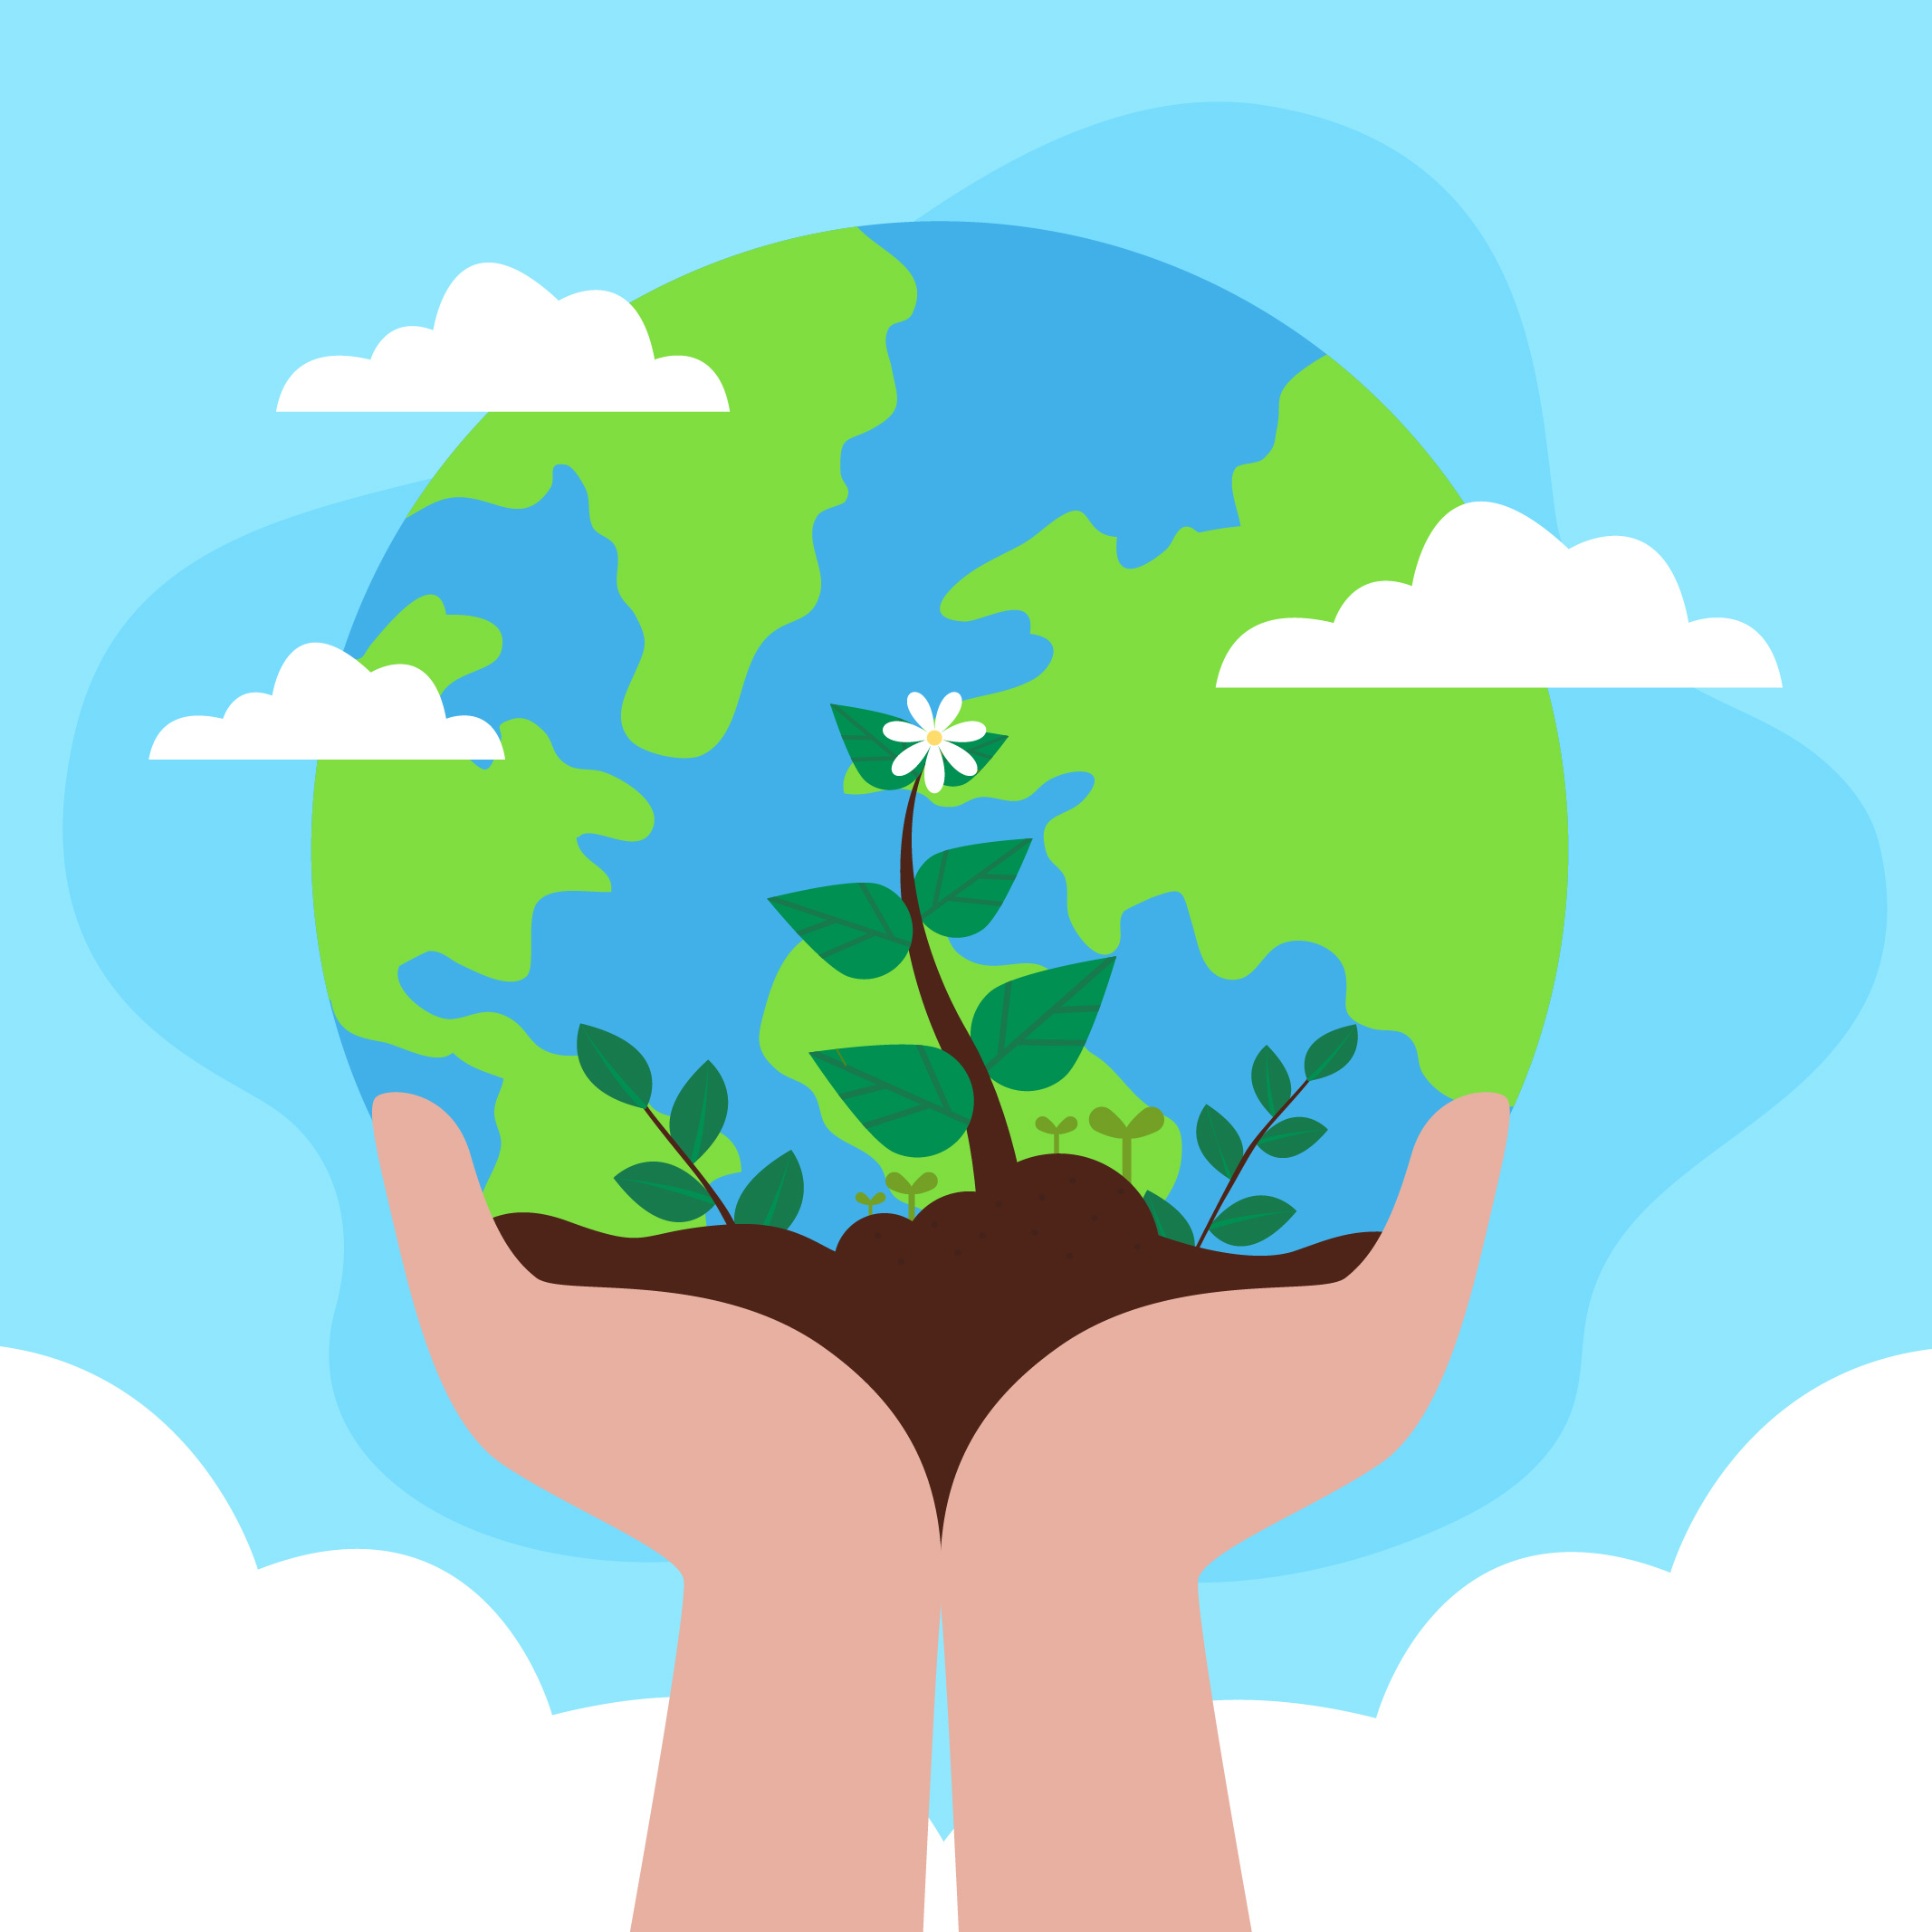 Free Earth Day Clipart EPS, Illustrator, JPG, PNG, SVG